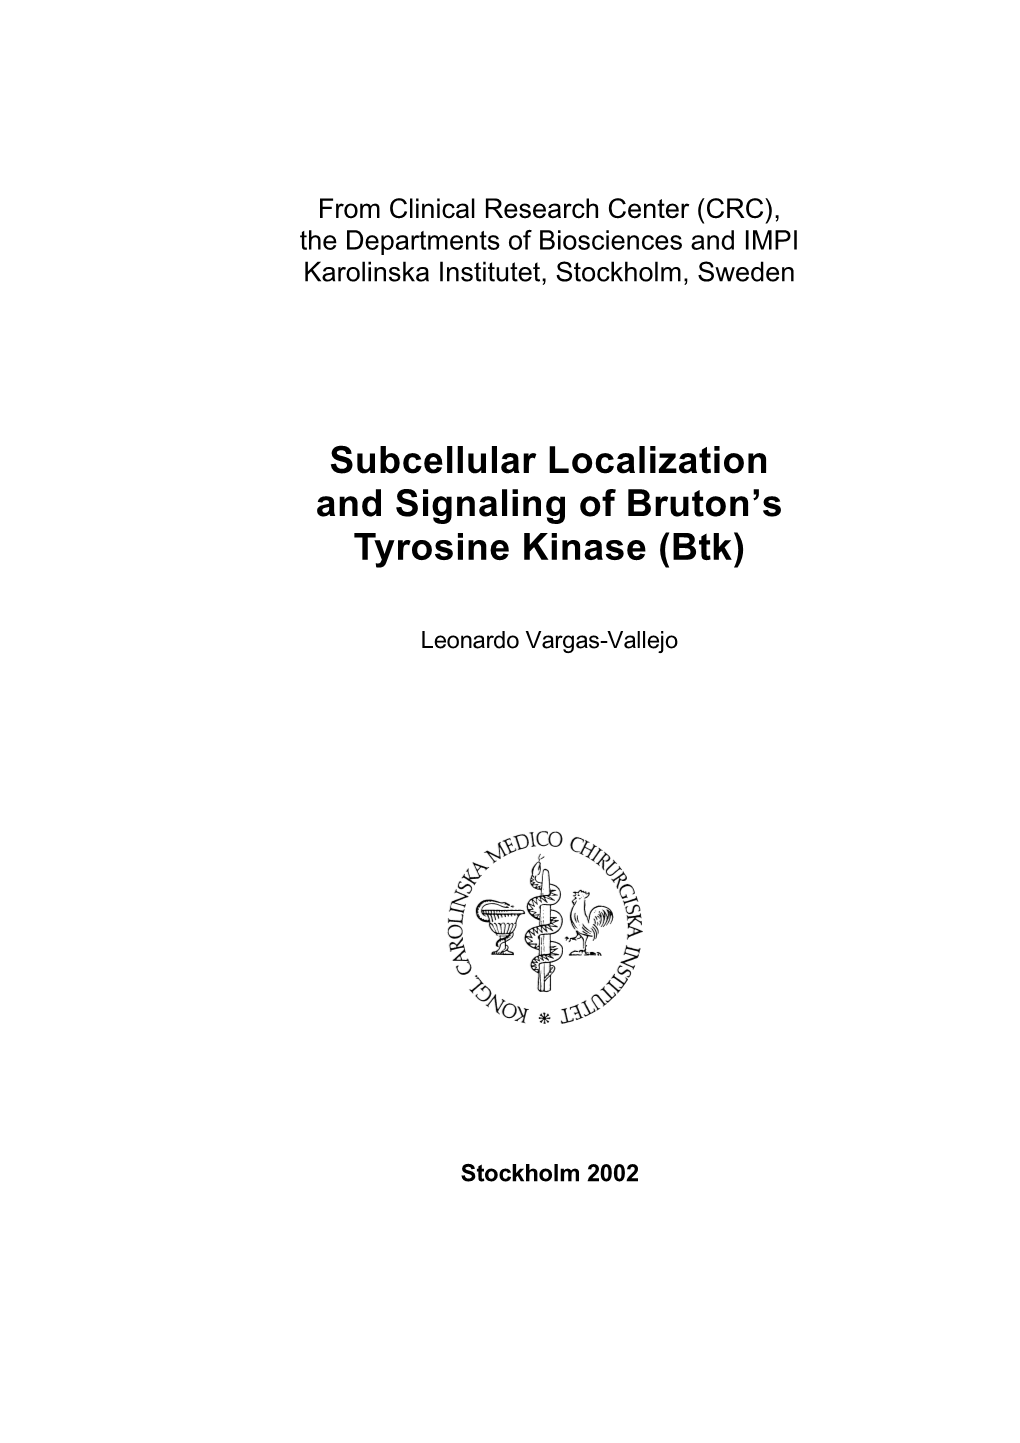 Subcellular Localization and Signaling of Bruton's Tyrosine